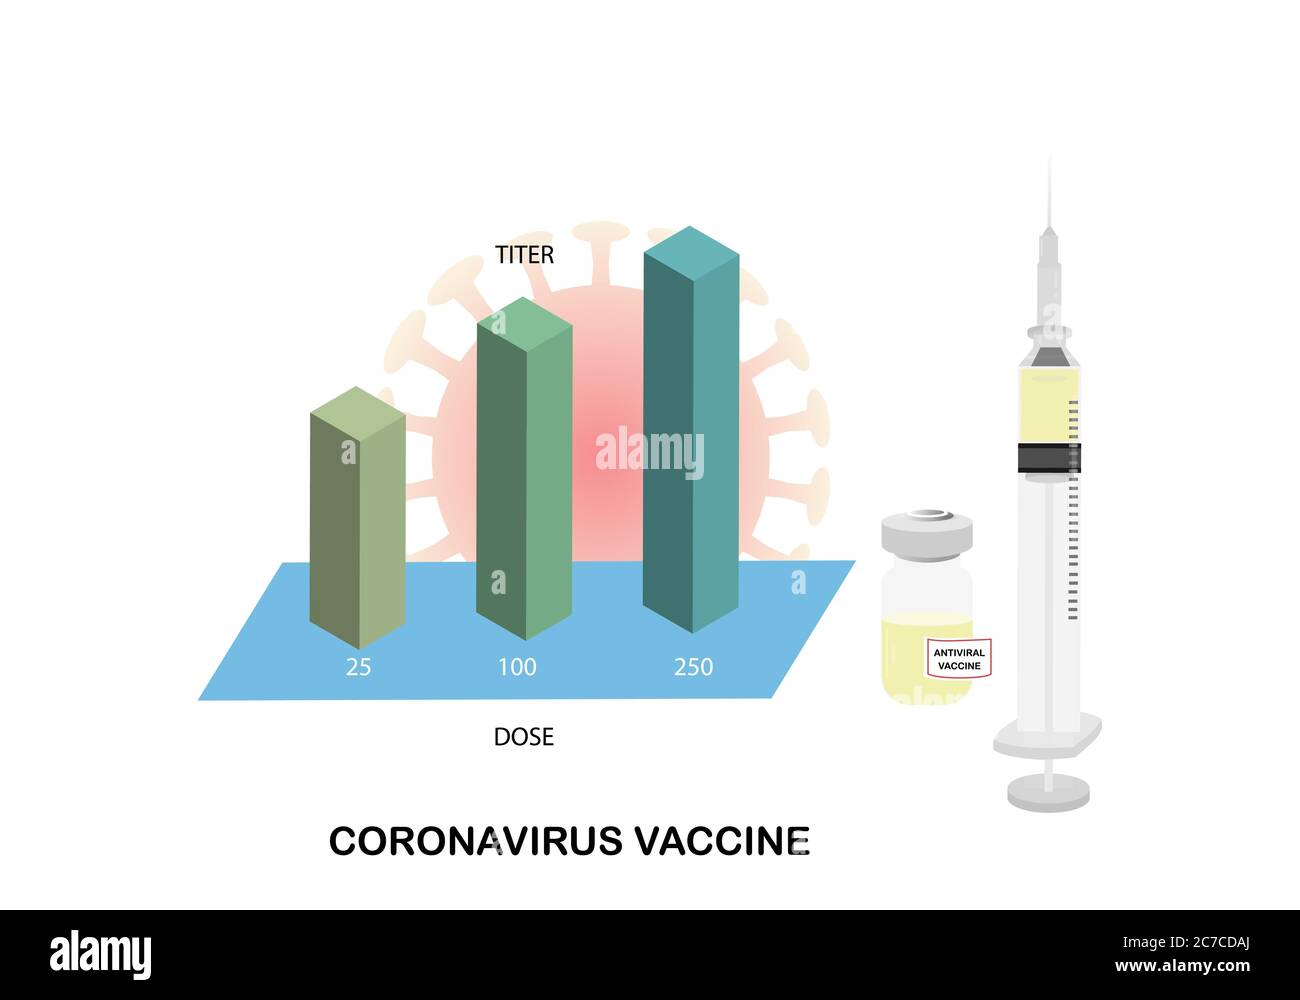 Illustration of syringe with needle and a bottle of vaccine for immunization against coronavirus. Bar graph showing titer of antibody in different dos Stock Vector